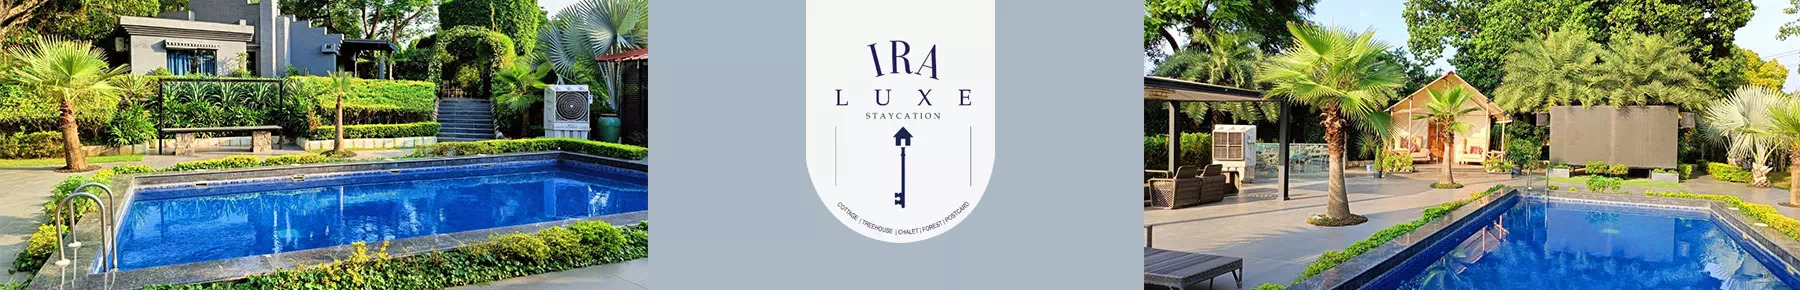 Experience Luxury Staycation: Iraluxe's Room with Private Pool